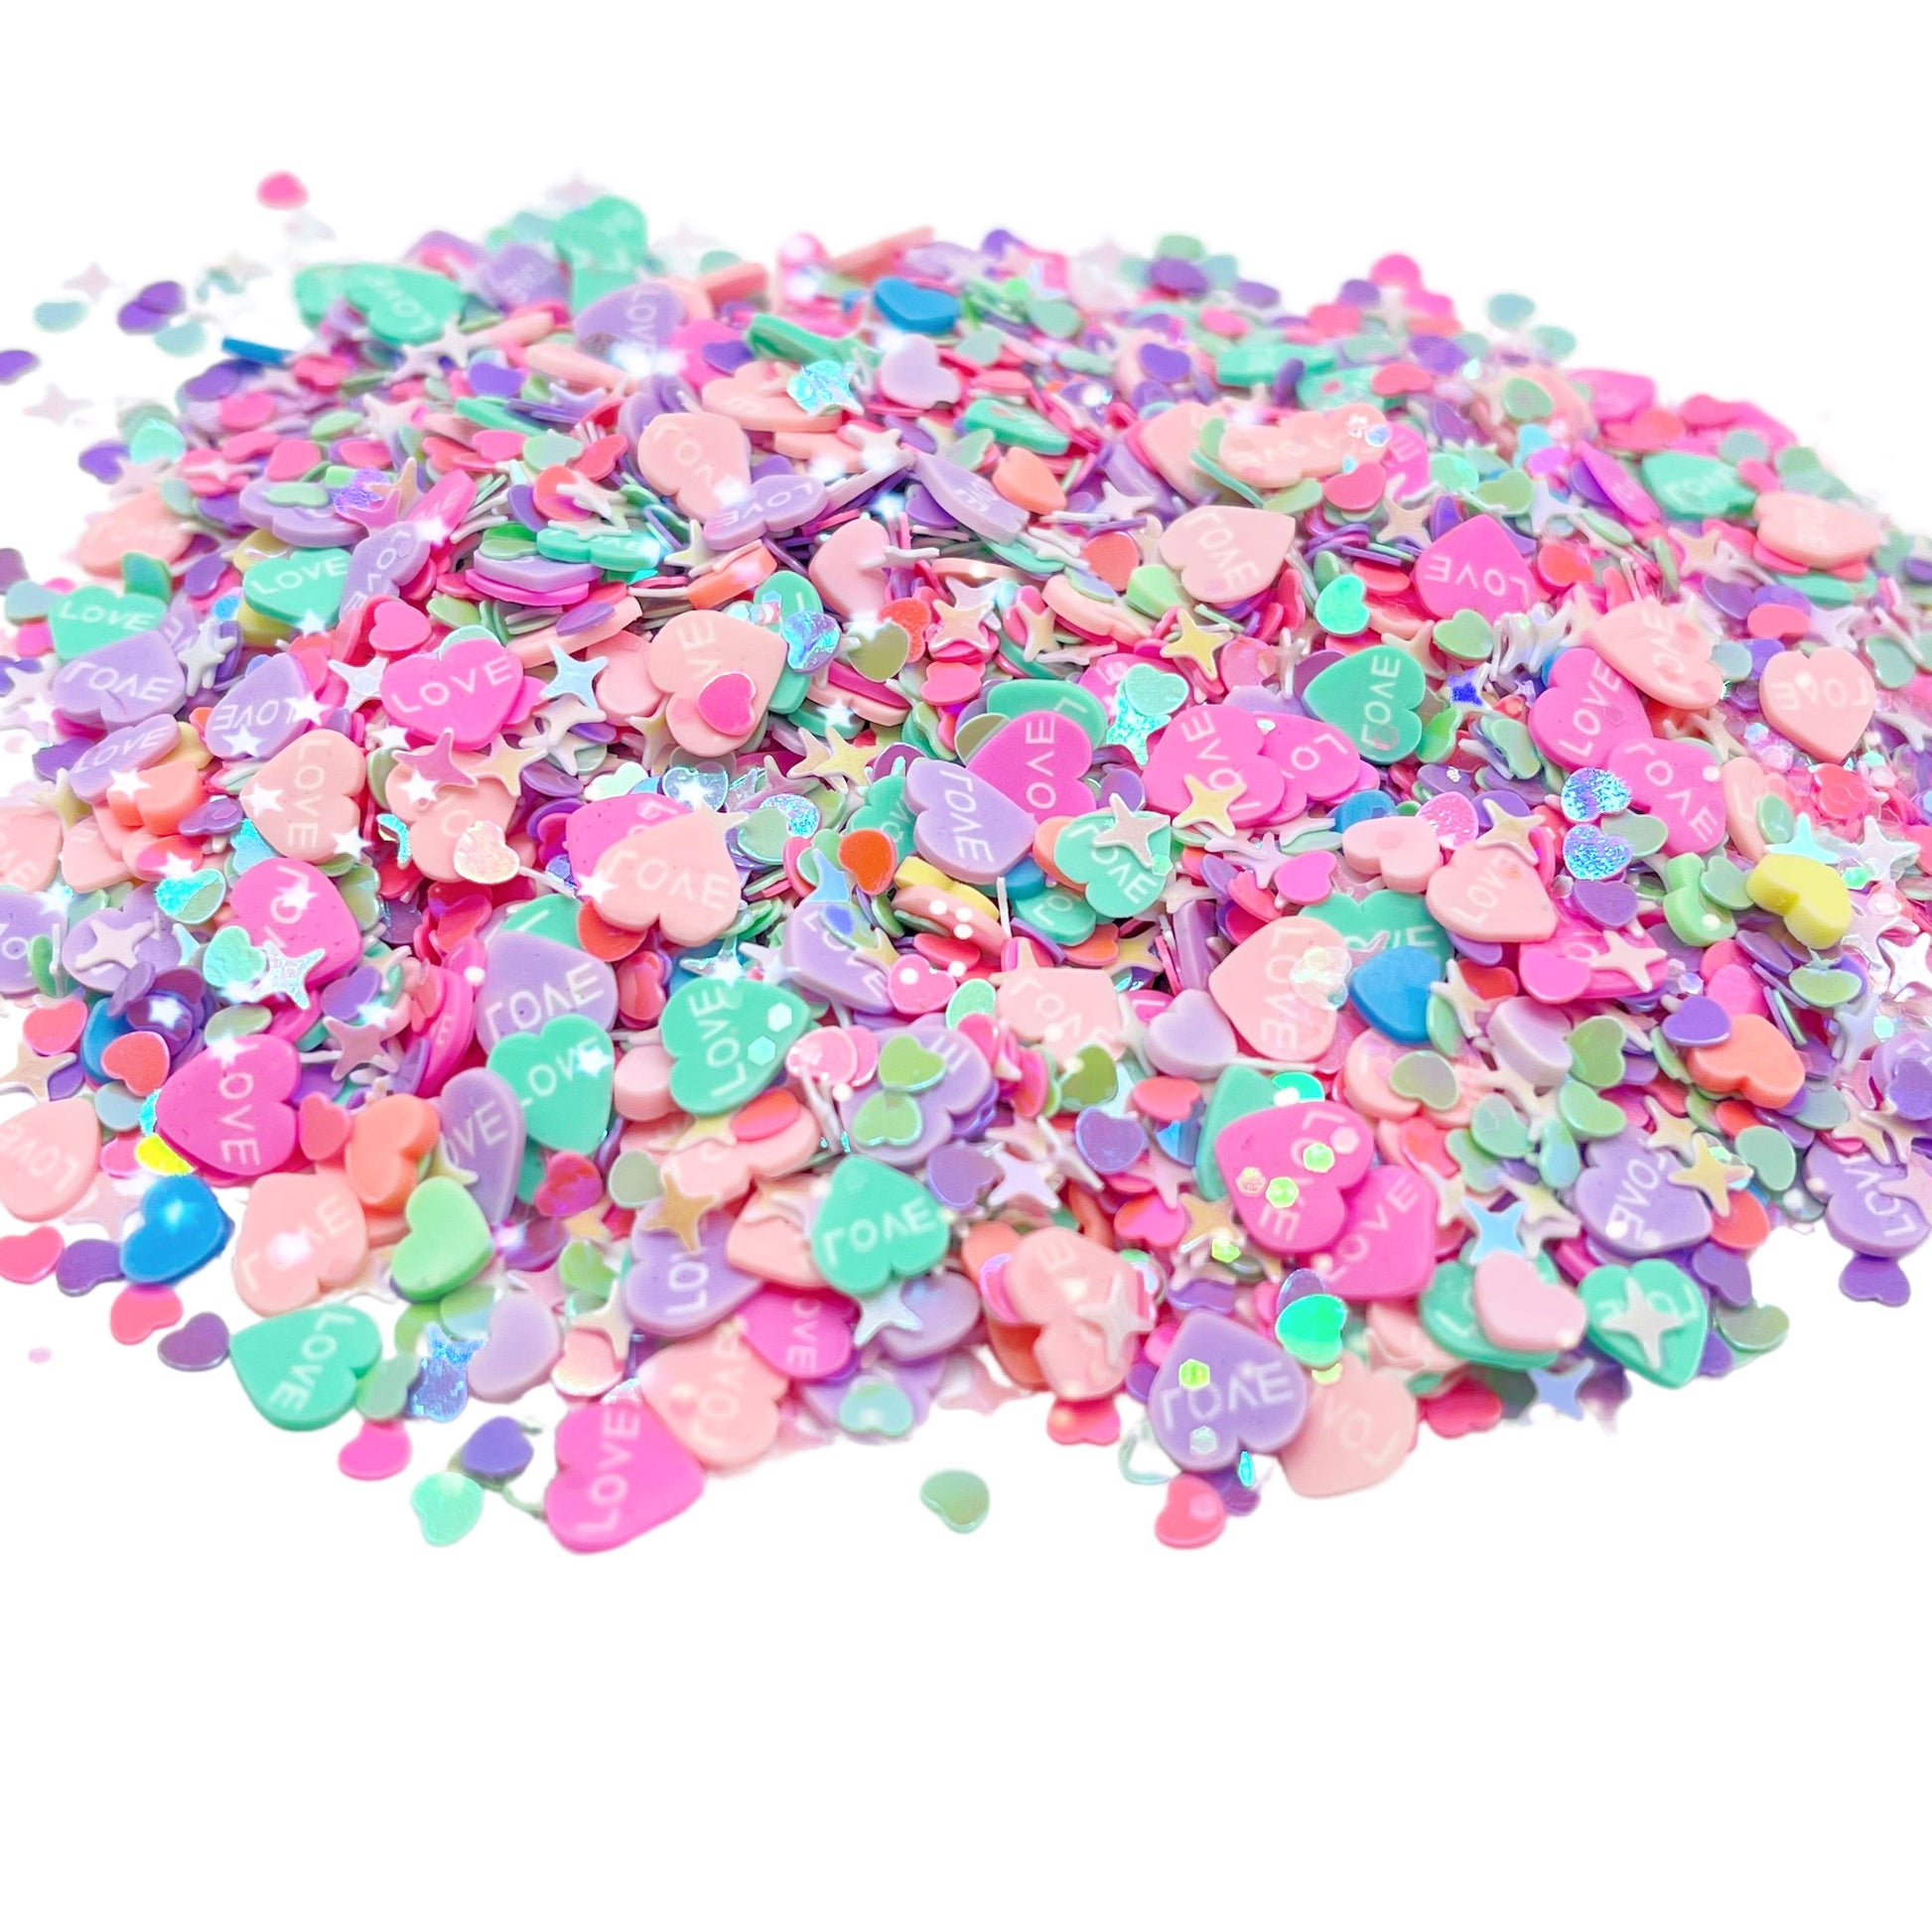 Pastel heart polymer clay slice mix and sequin mix with sequin hearts and sparkles.